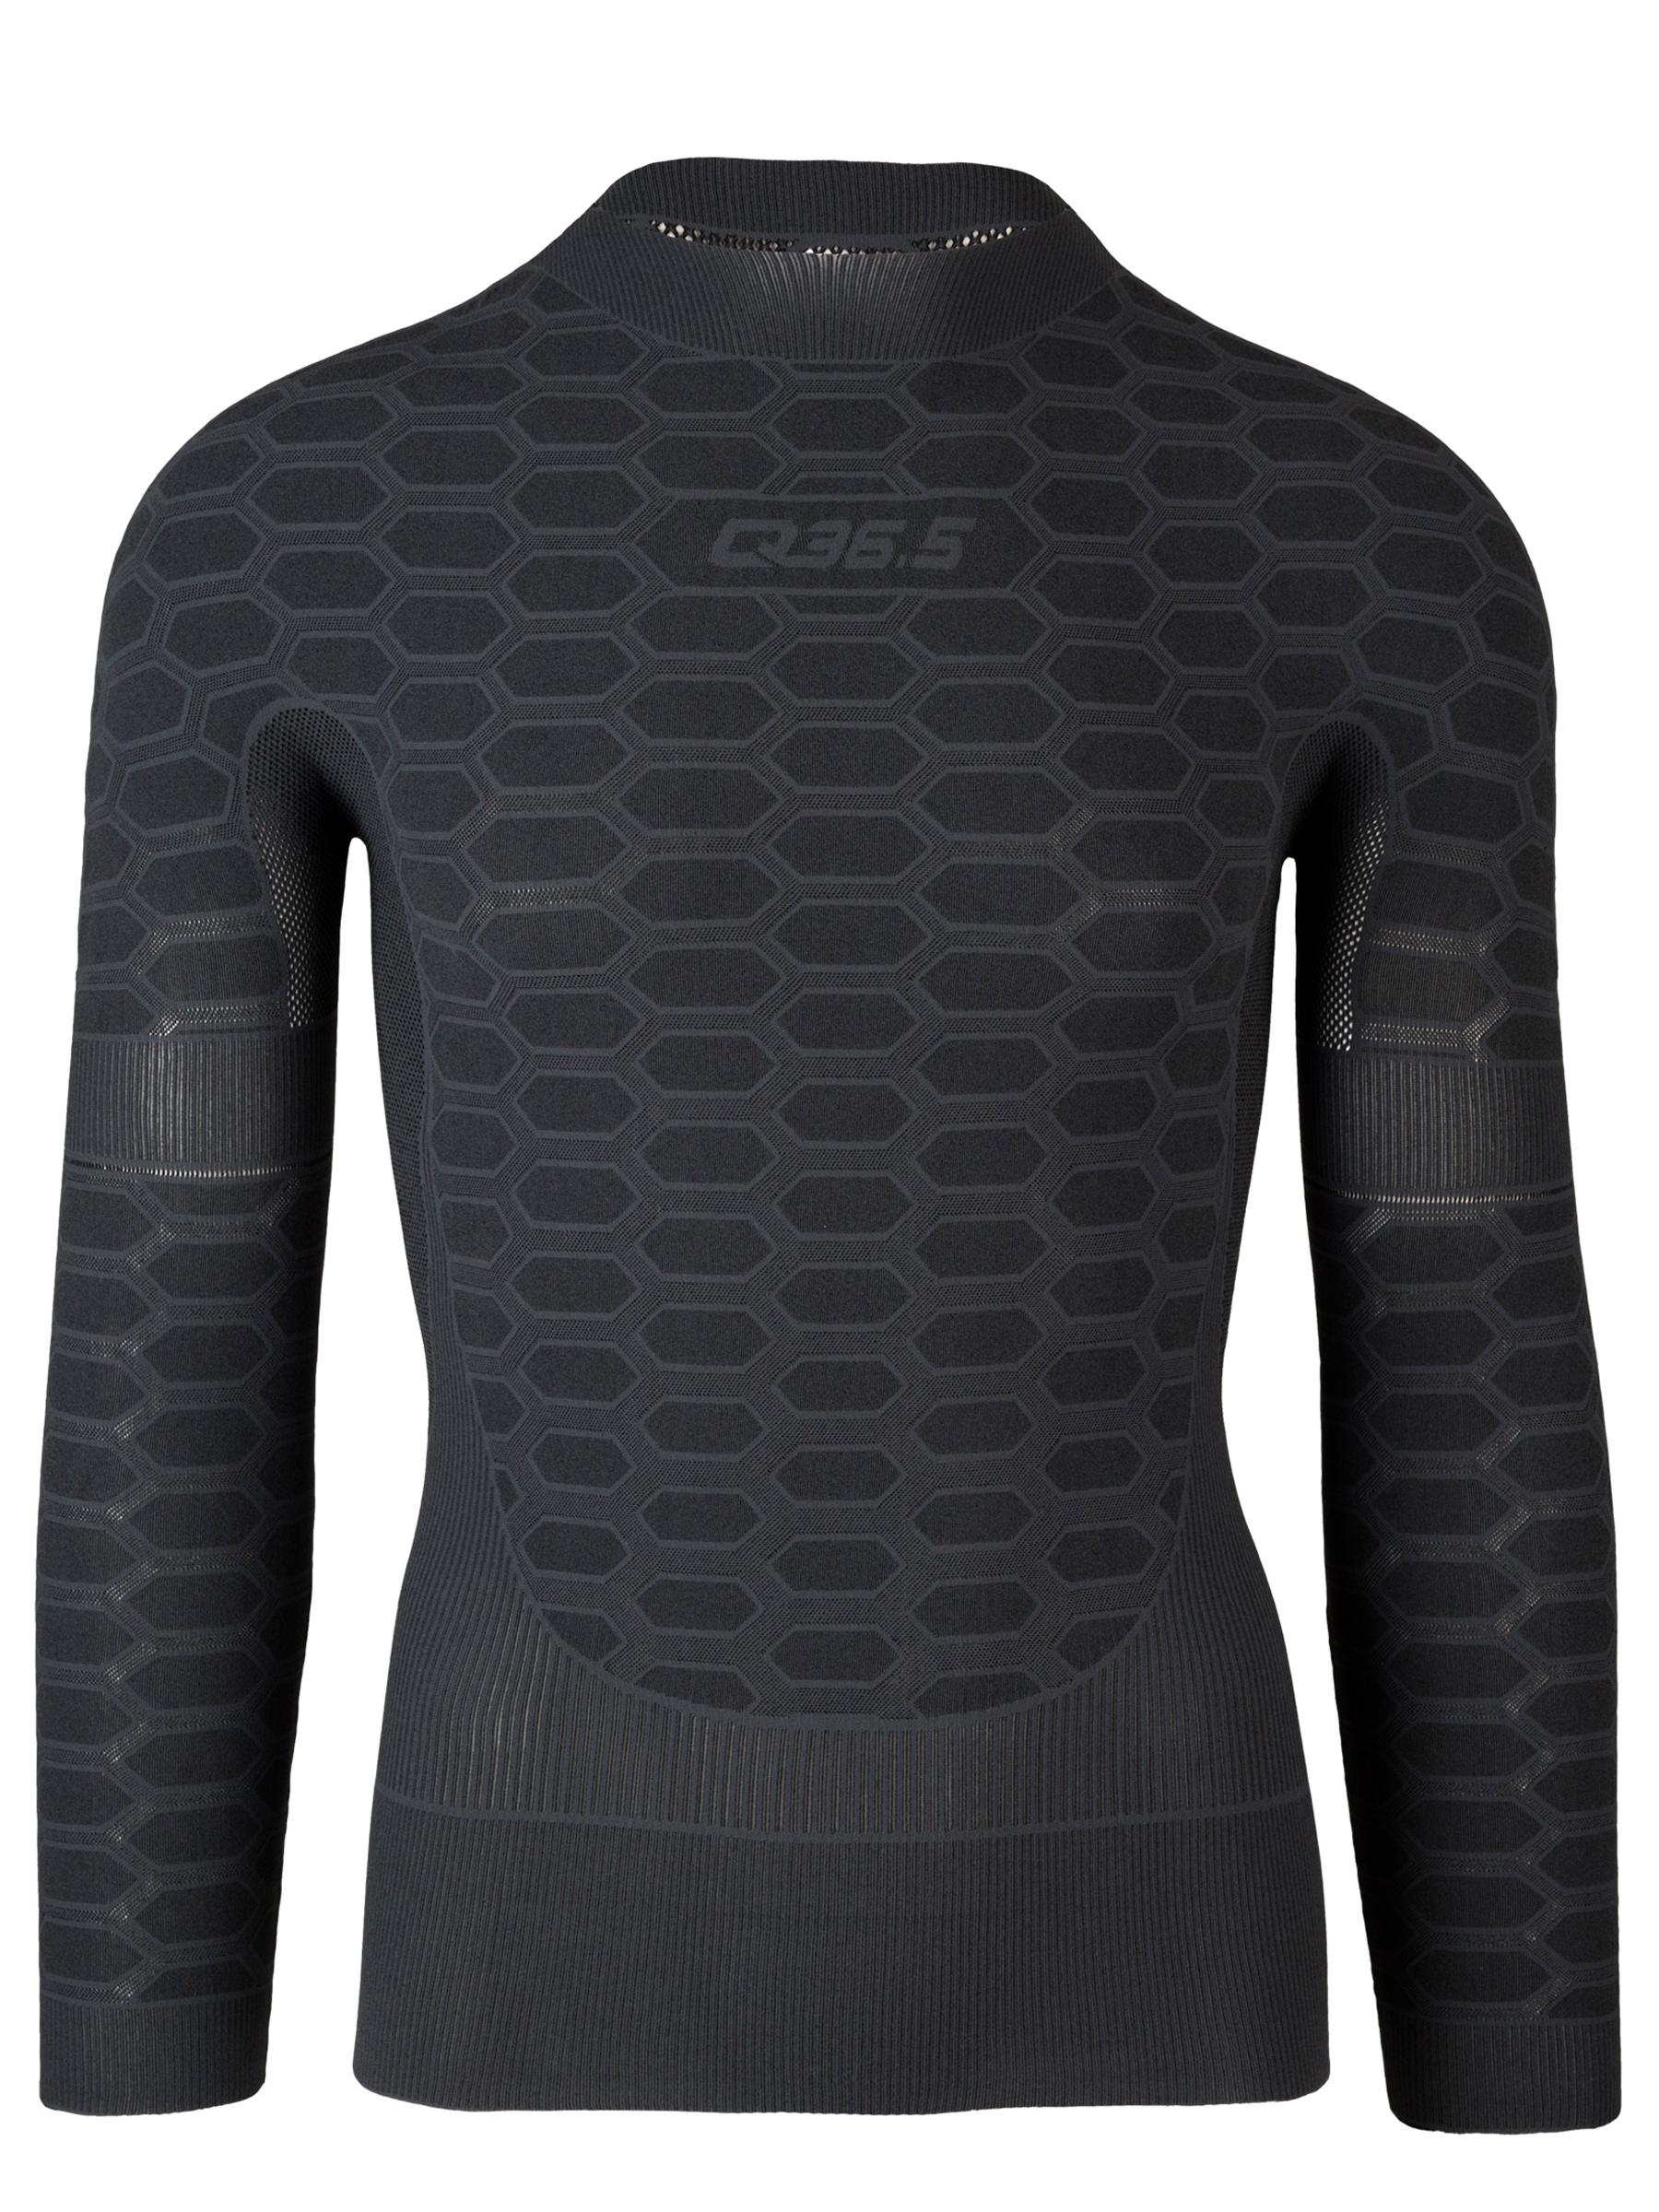 Discover Men's Cycling Baselayers for Every Season